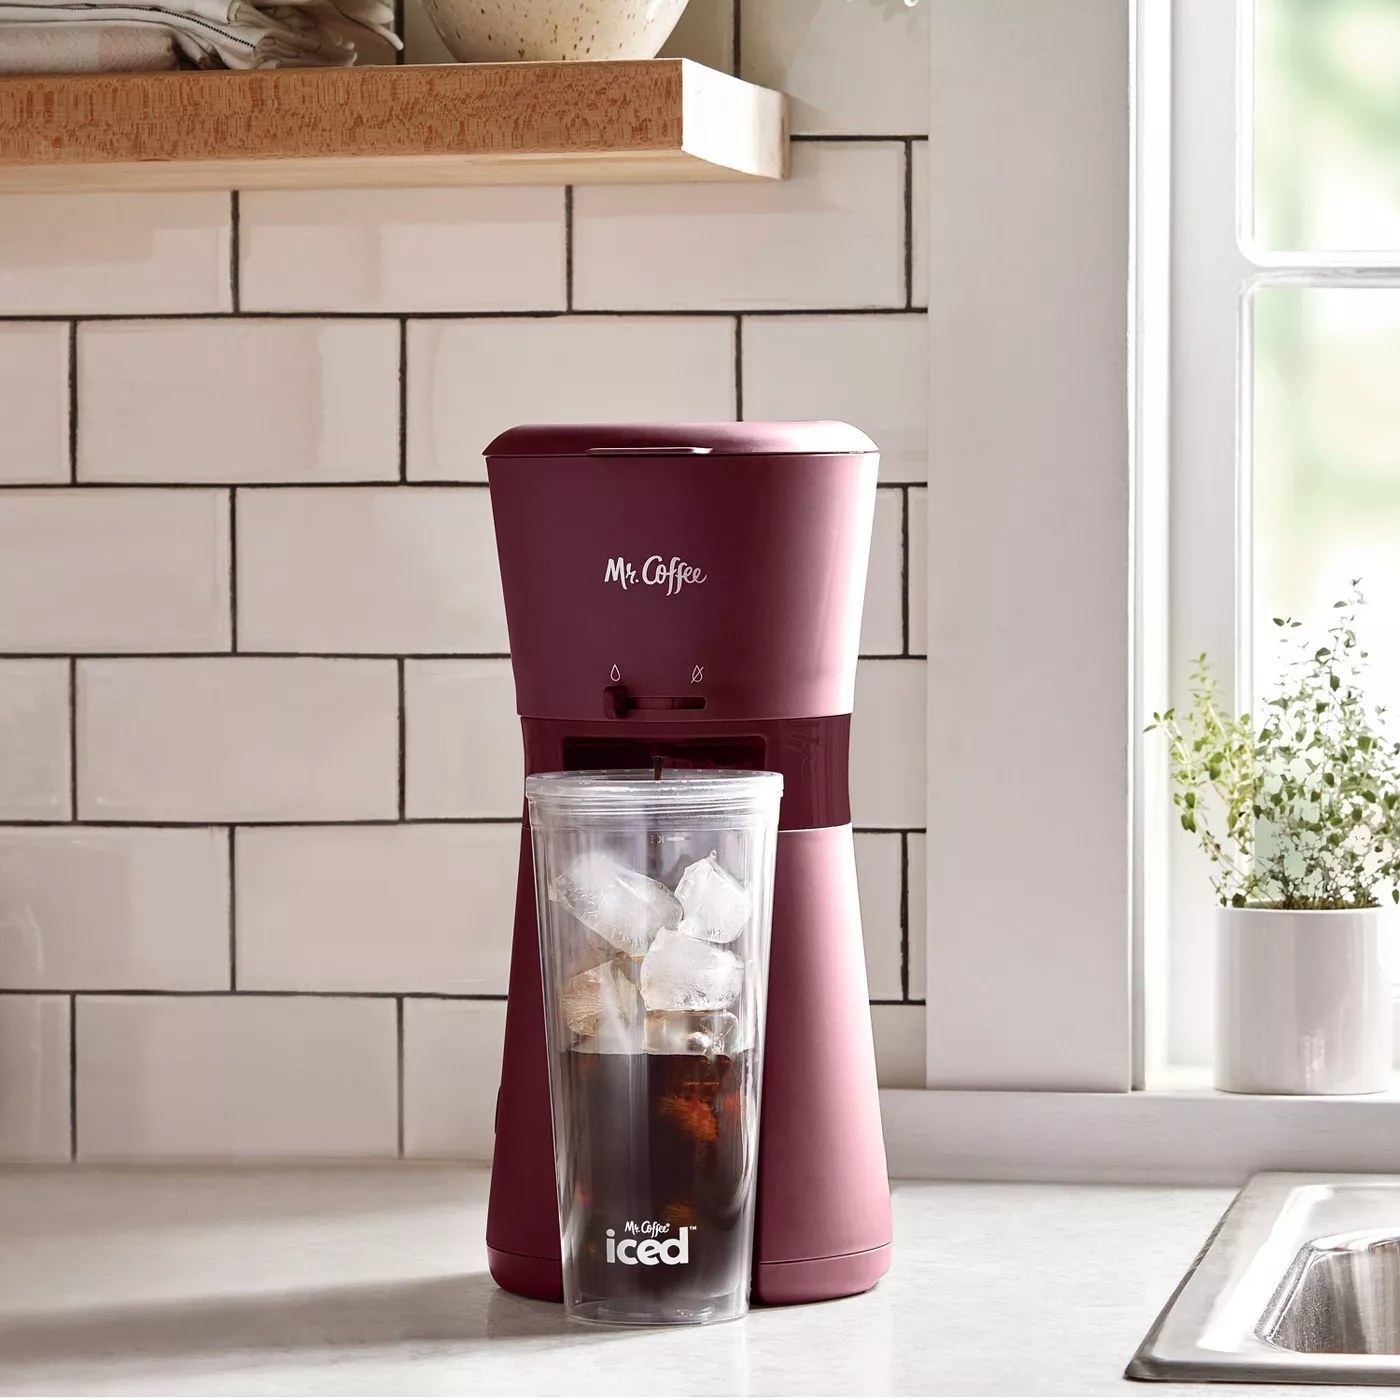 The iced coffee maker and the clear tumbler that comes with it on a kitchen counter